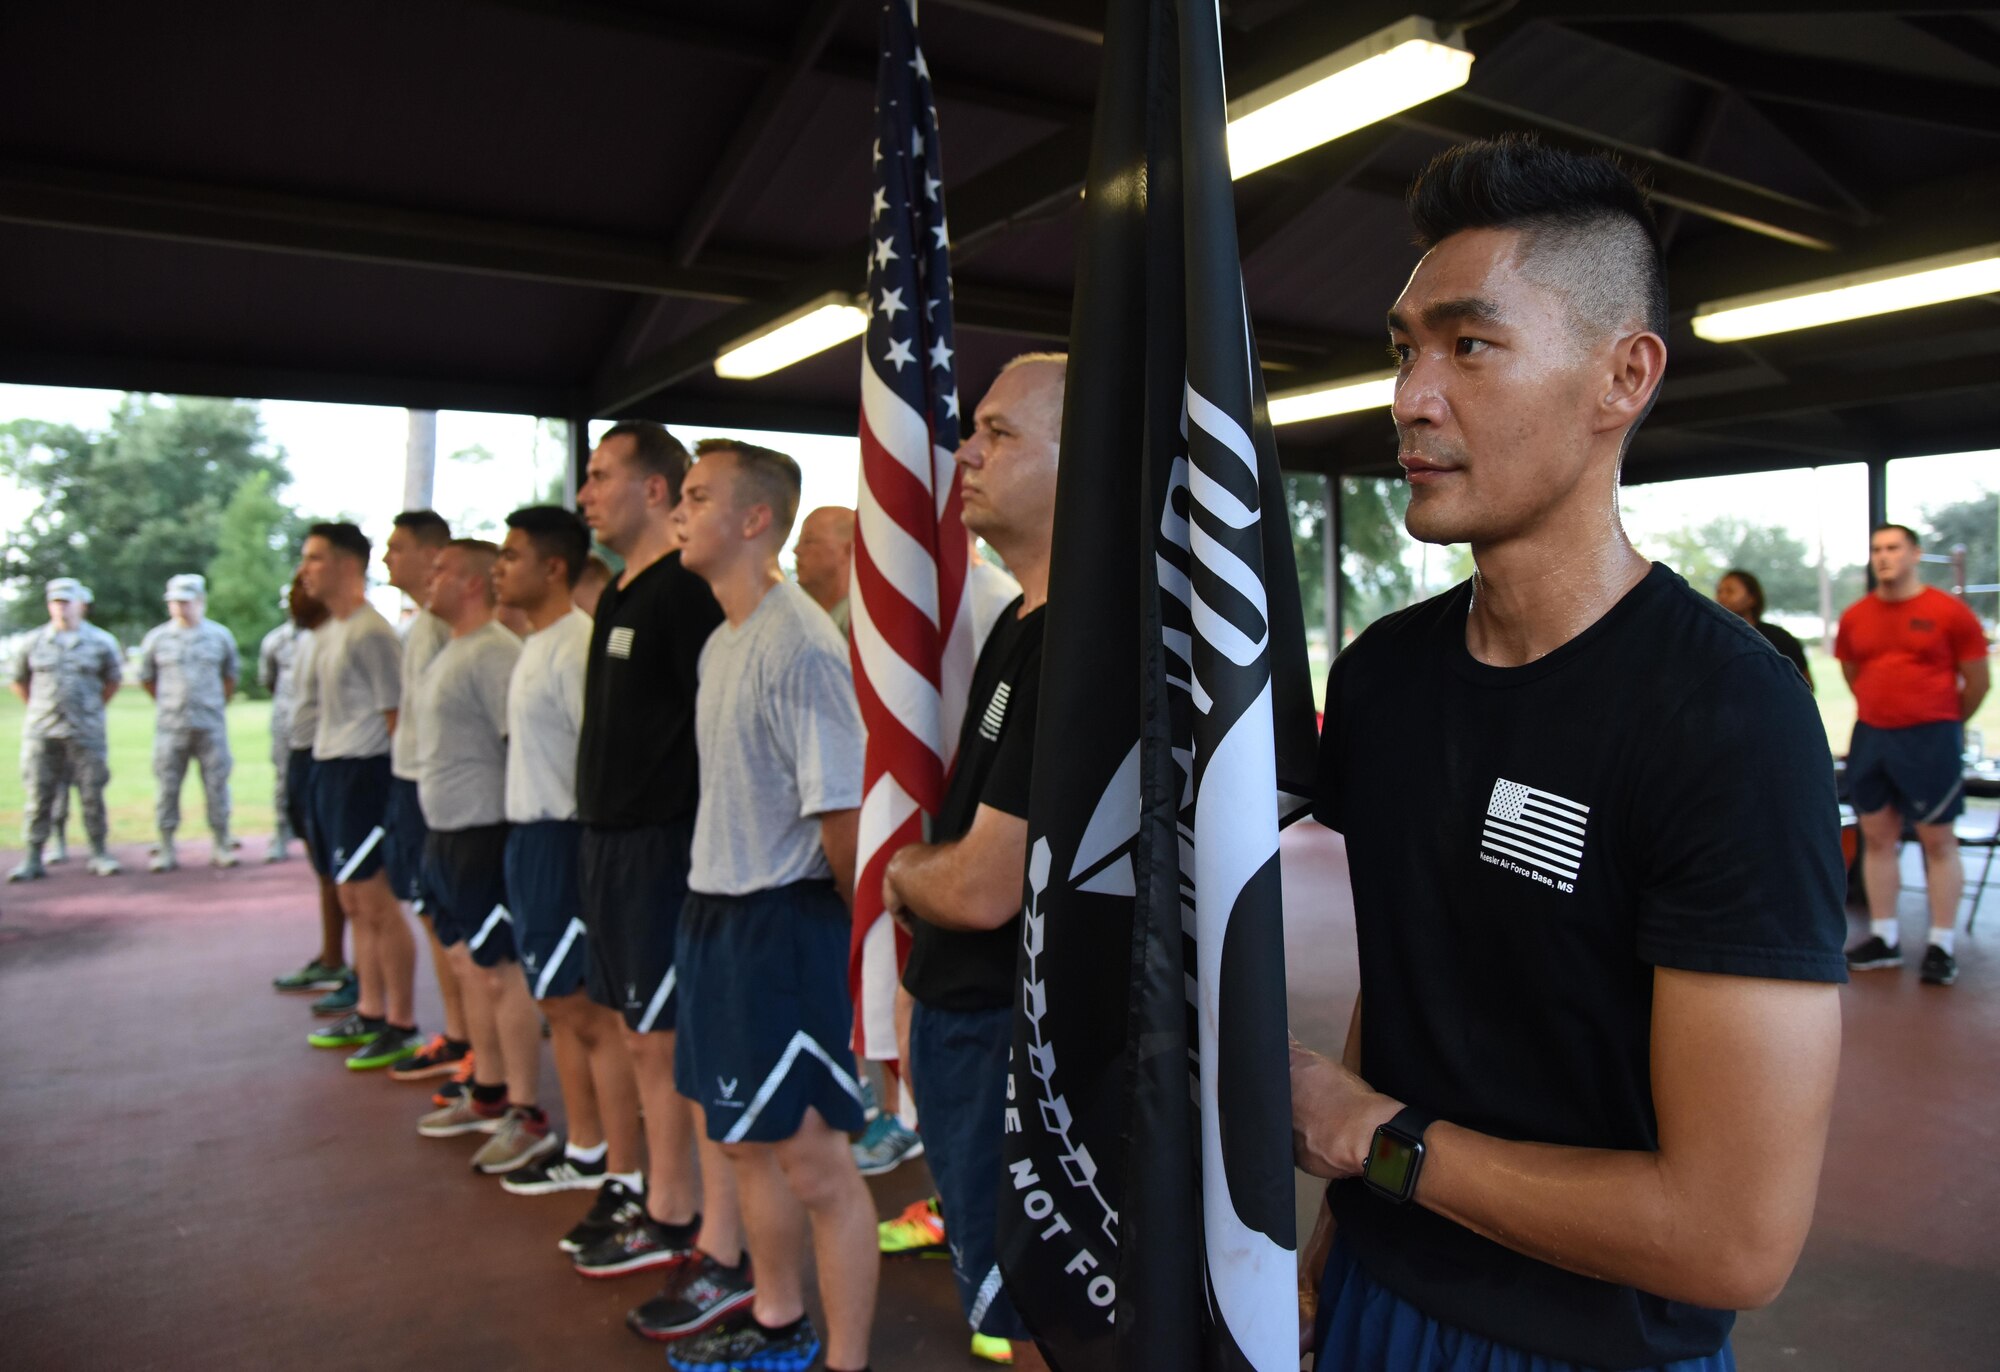 Staff Sgt. Mikhel Carpio, 81st Communications Squadron client systems technician, stands in formation during Keesler’s POW/MIA 24-hour memorial run and vigil at the Crotwell Track Sept. 14, 2017, on Keesler Air Force Base, Mississippi. The event was held to raise awareness and pay tribute to all prisoners of war and those military members still missing in action. (U.S. Air Force photo by Kemberly Groue)